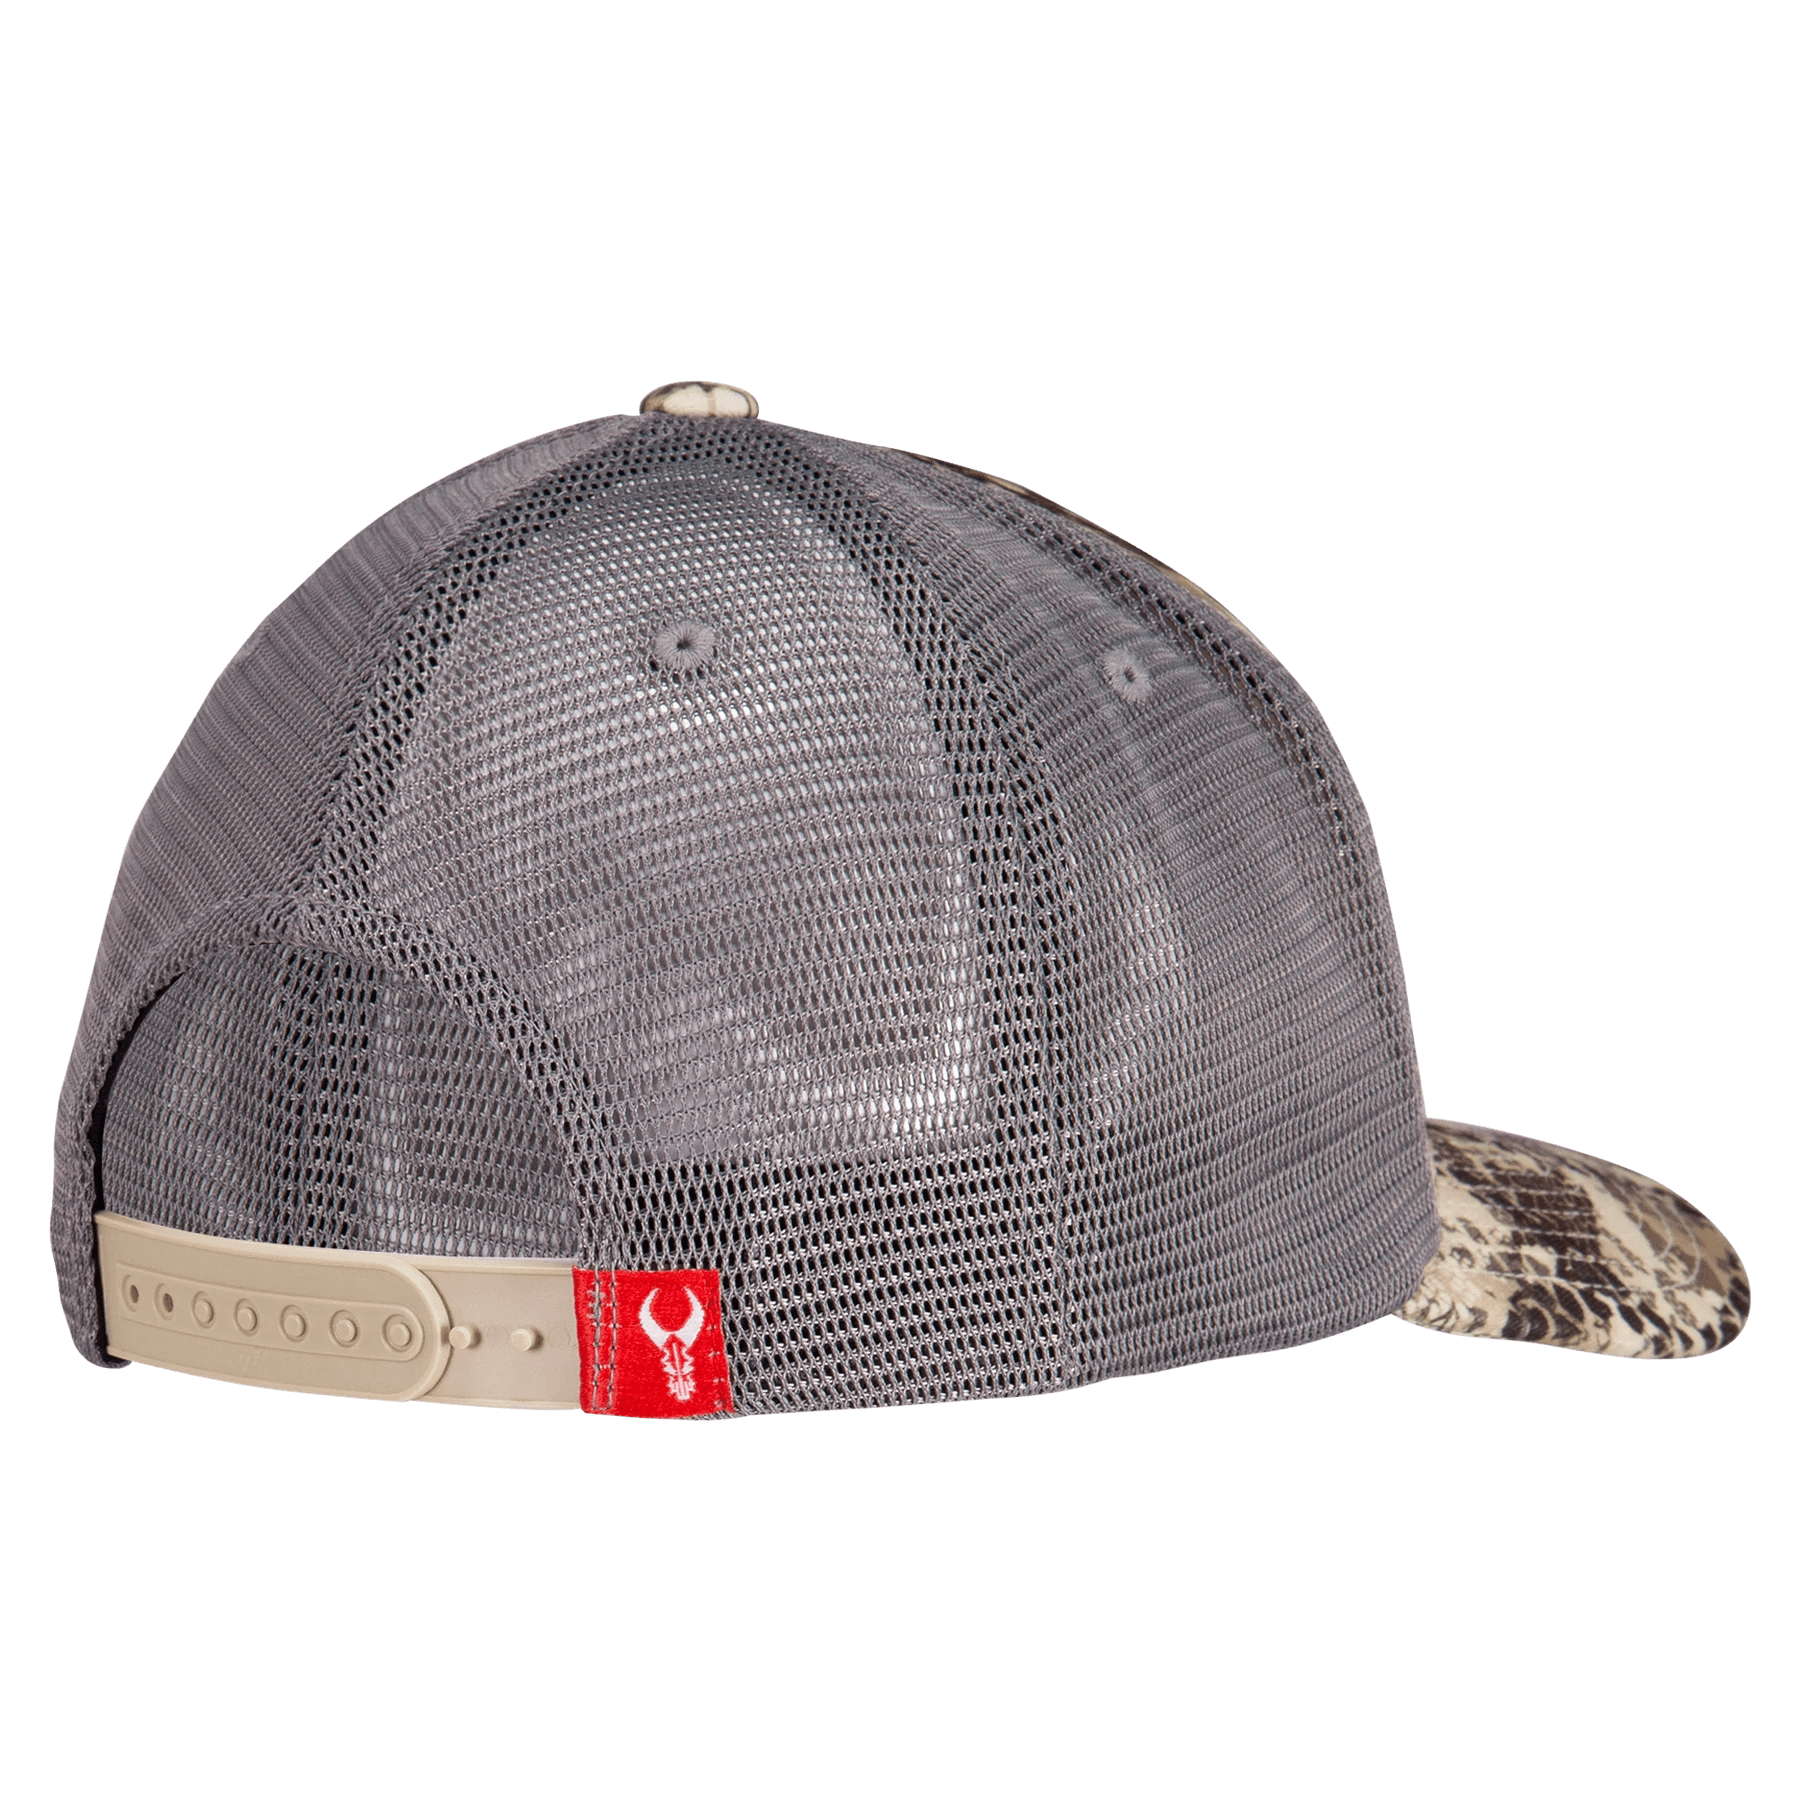 Badlands Trucker Blank Hat - Leapfrog Outdoor Sports and Apparel